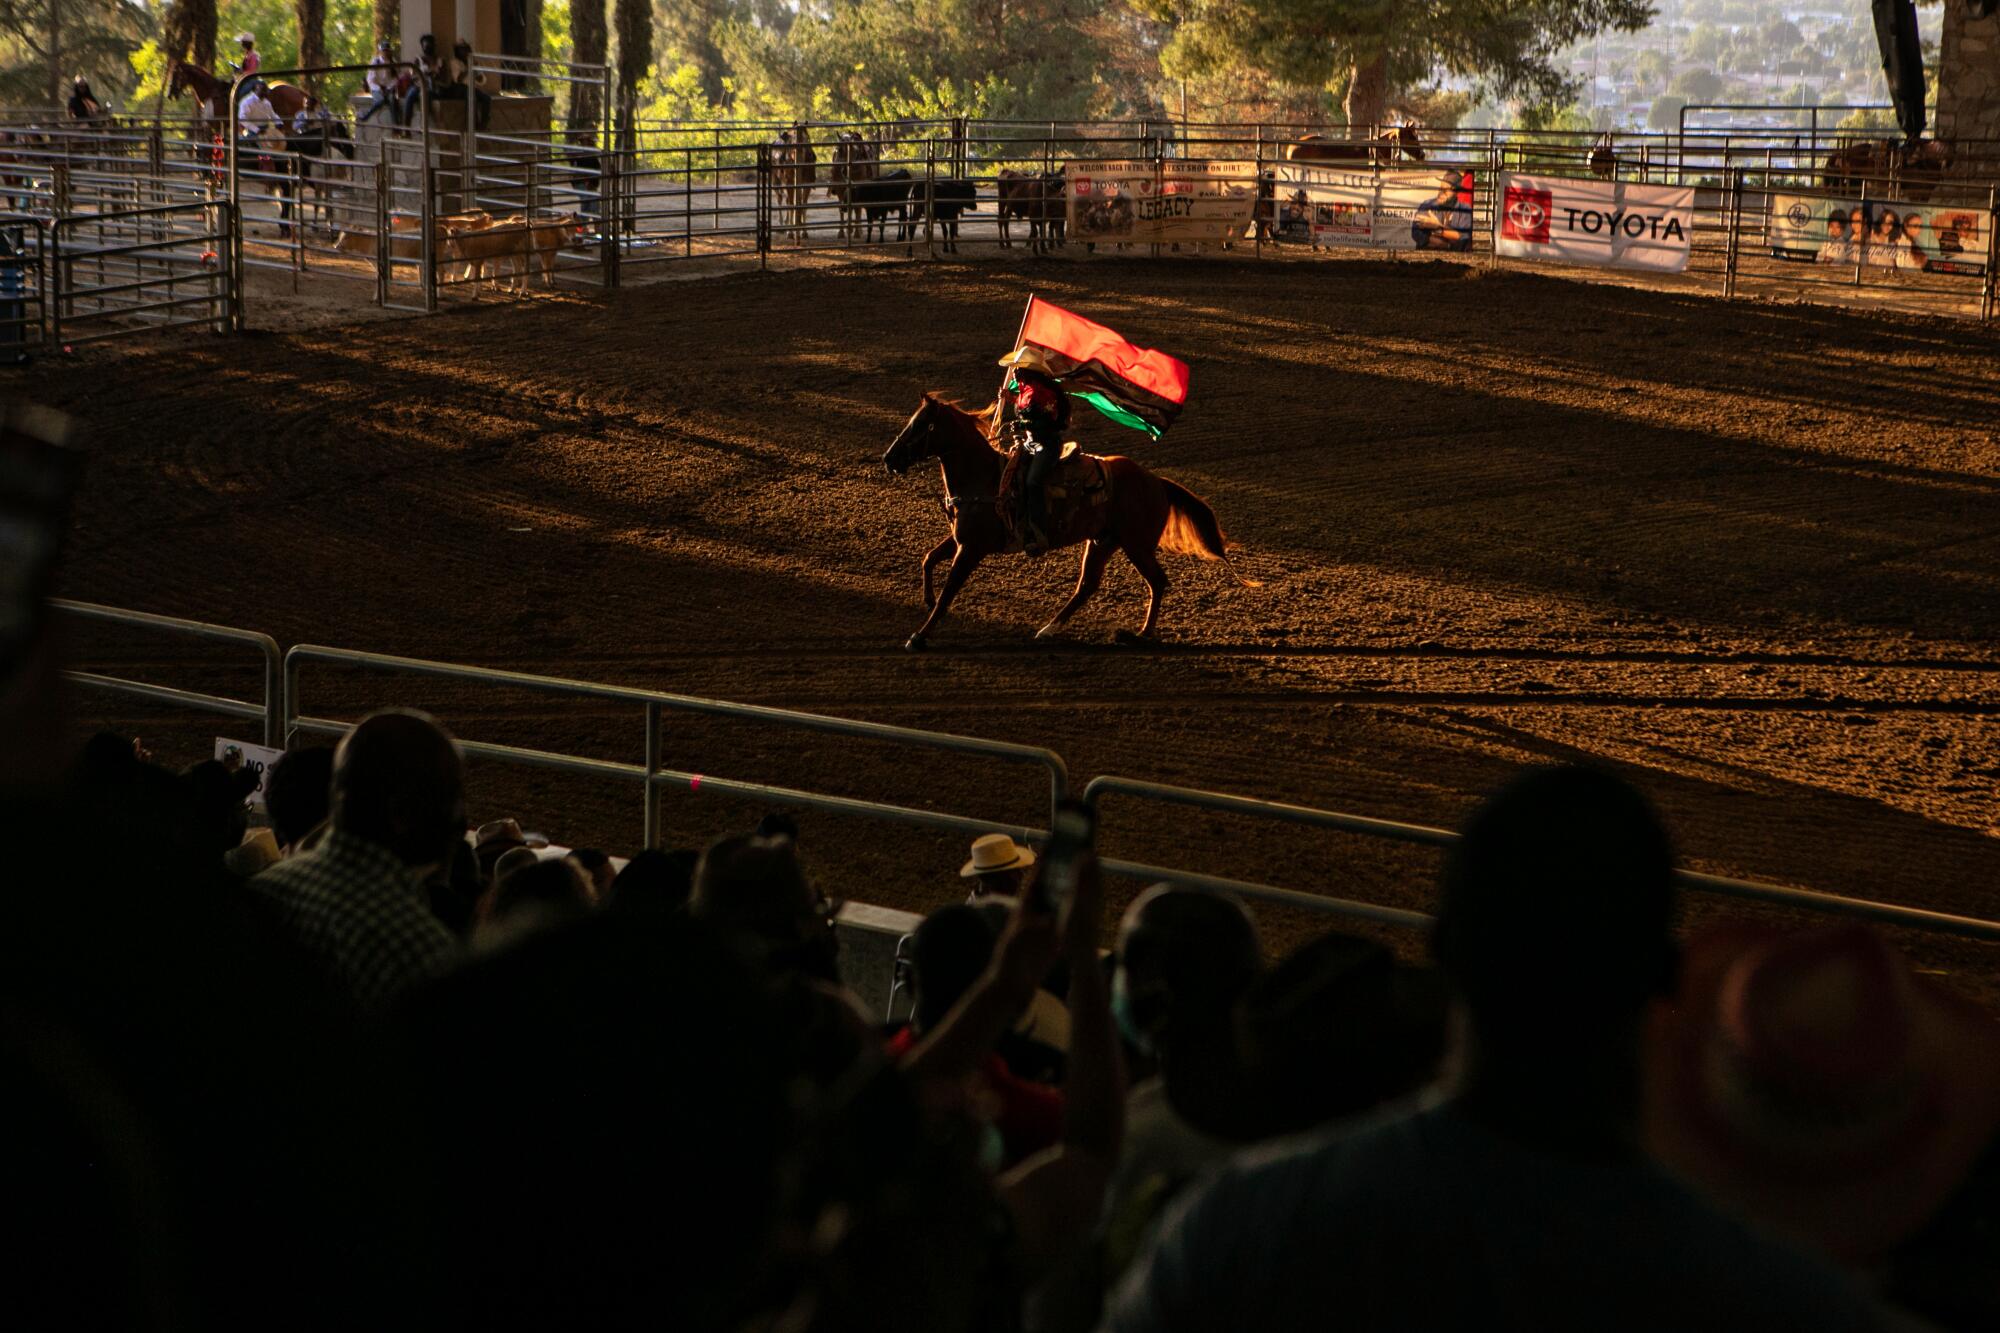 A cowgirl carrying the Pan-African flag as she rides a horse at a rodeo